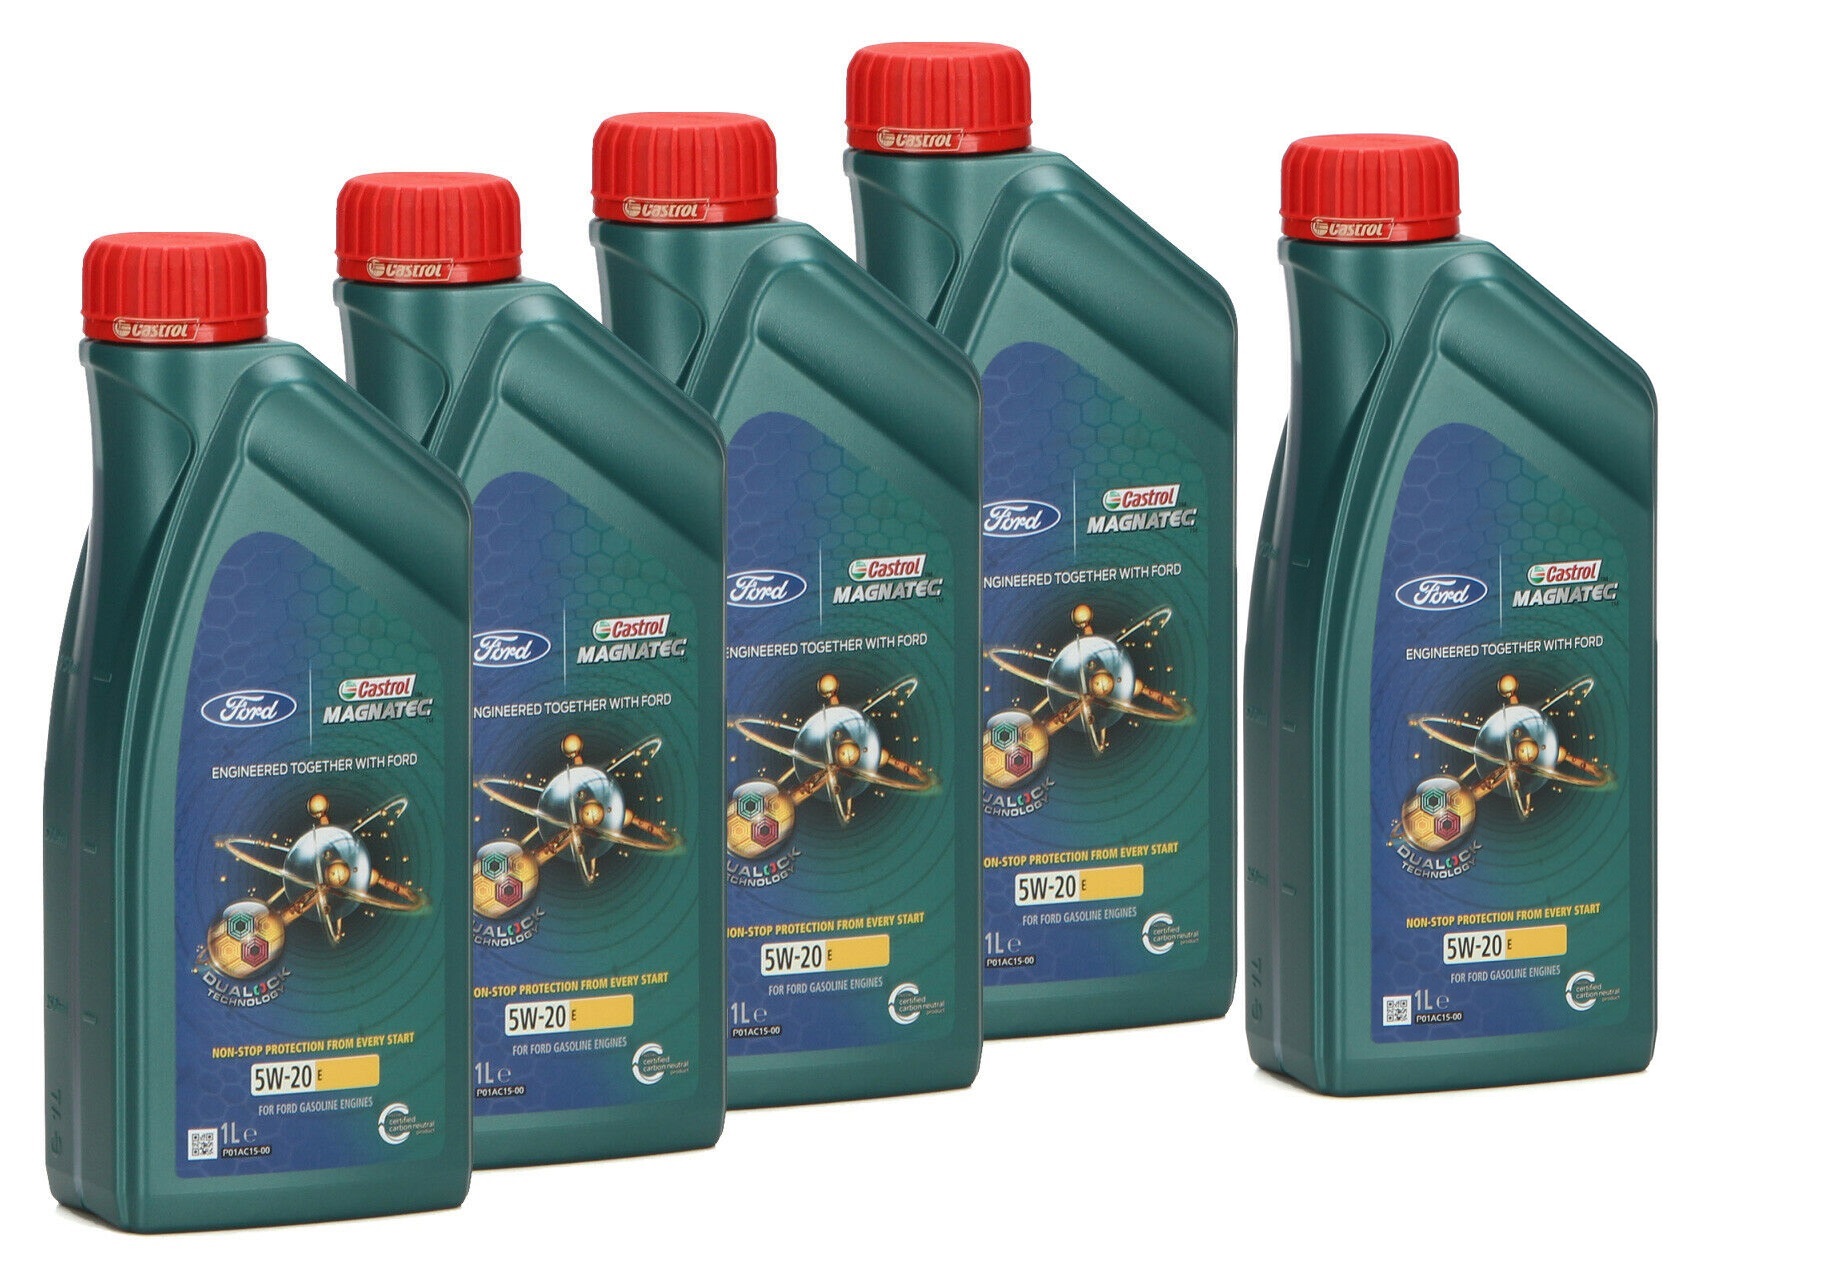 Масло castrol ford. Ford-Castrol Magnatec professional e 5w-20. Castrol Magnatec professional 5w20 Ford. Масло кастрол 5 20 Форд. Castrol Magnatec professional e 5w-20 5 л.